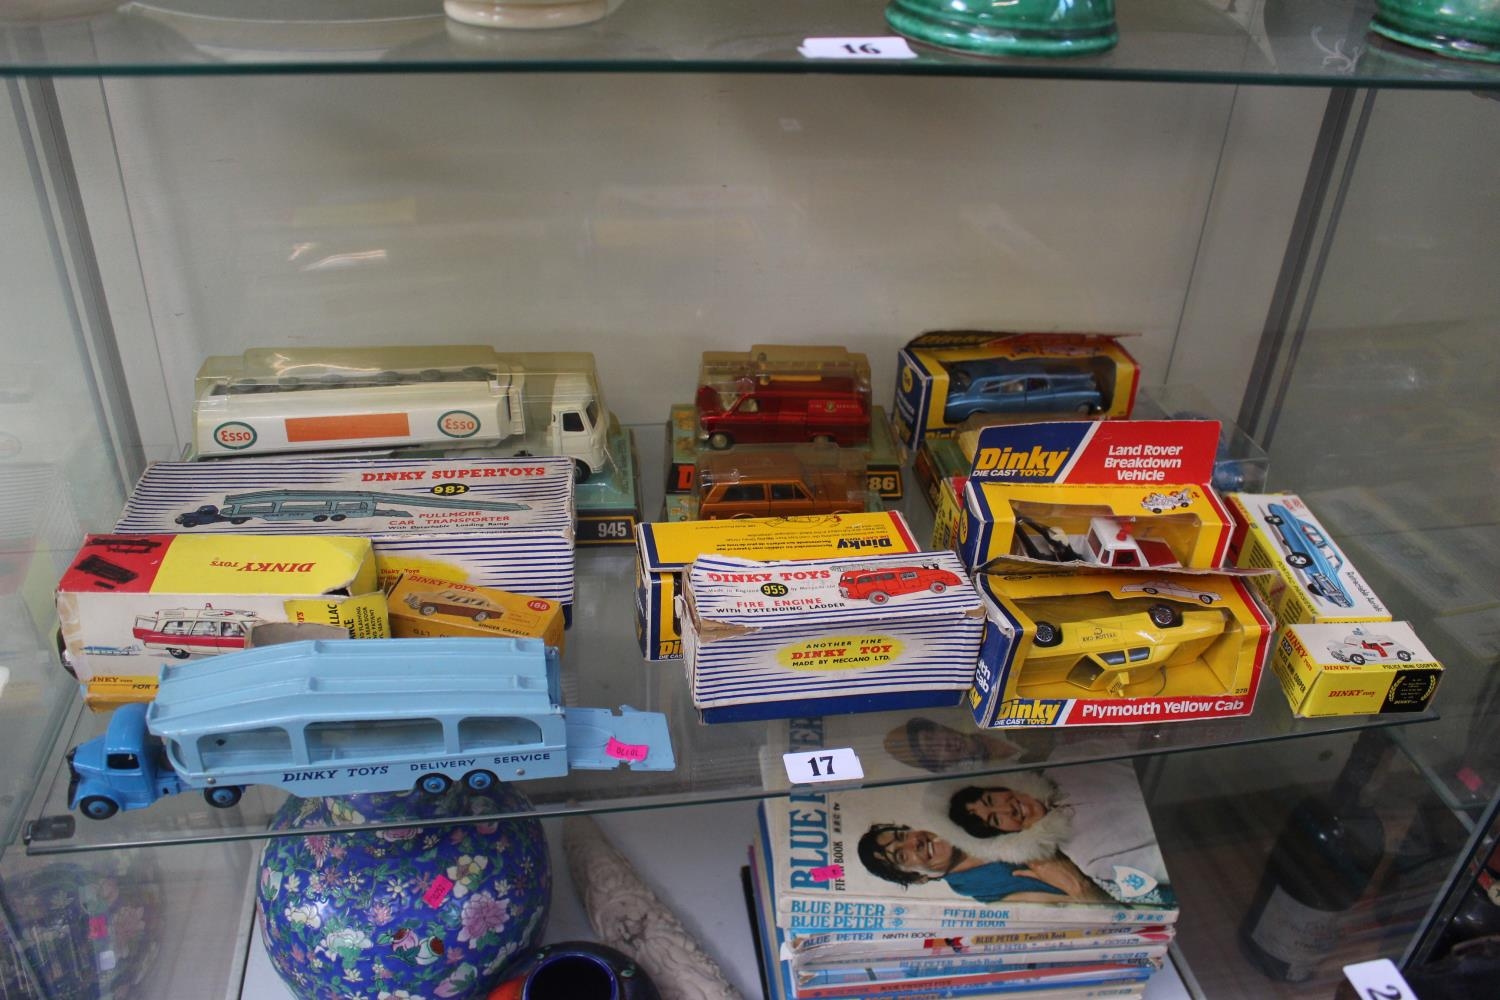 Good collection of Boxed Dinky Toy vehicles to include 982 Pullmore Transporter, 955 Fire Engine,